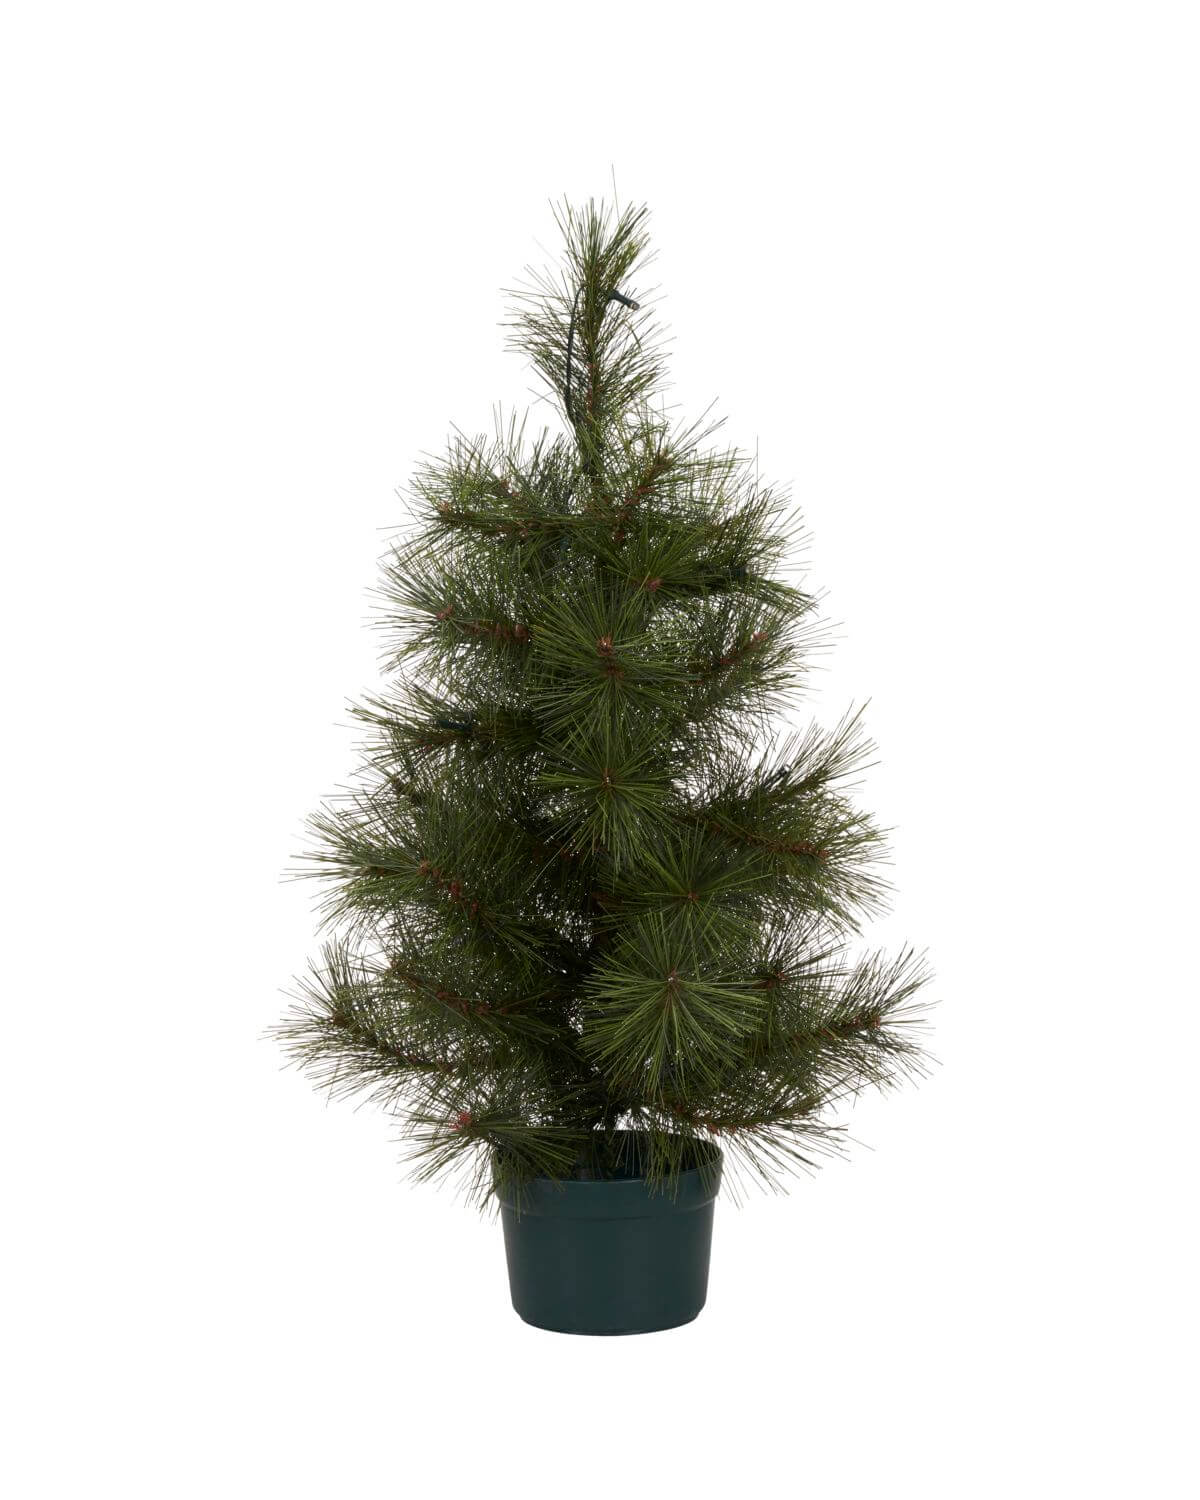 Pinus - Christmas Tree with LED Lights | 60cm | by House Doctor - Lifestory